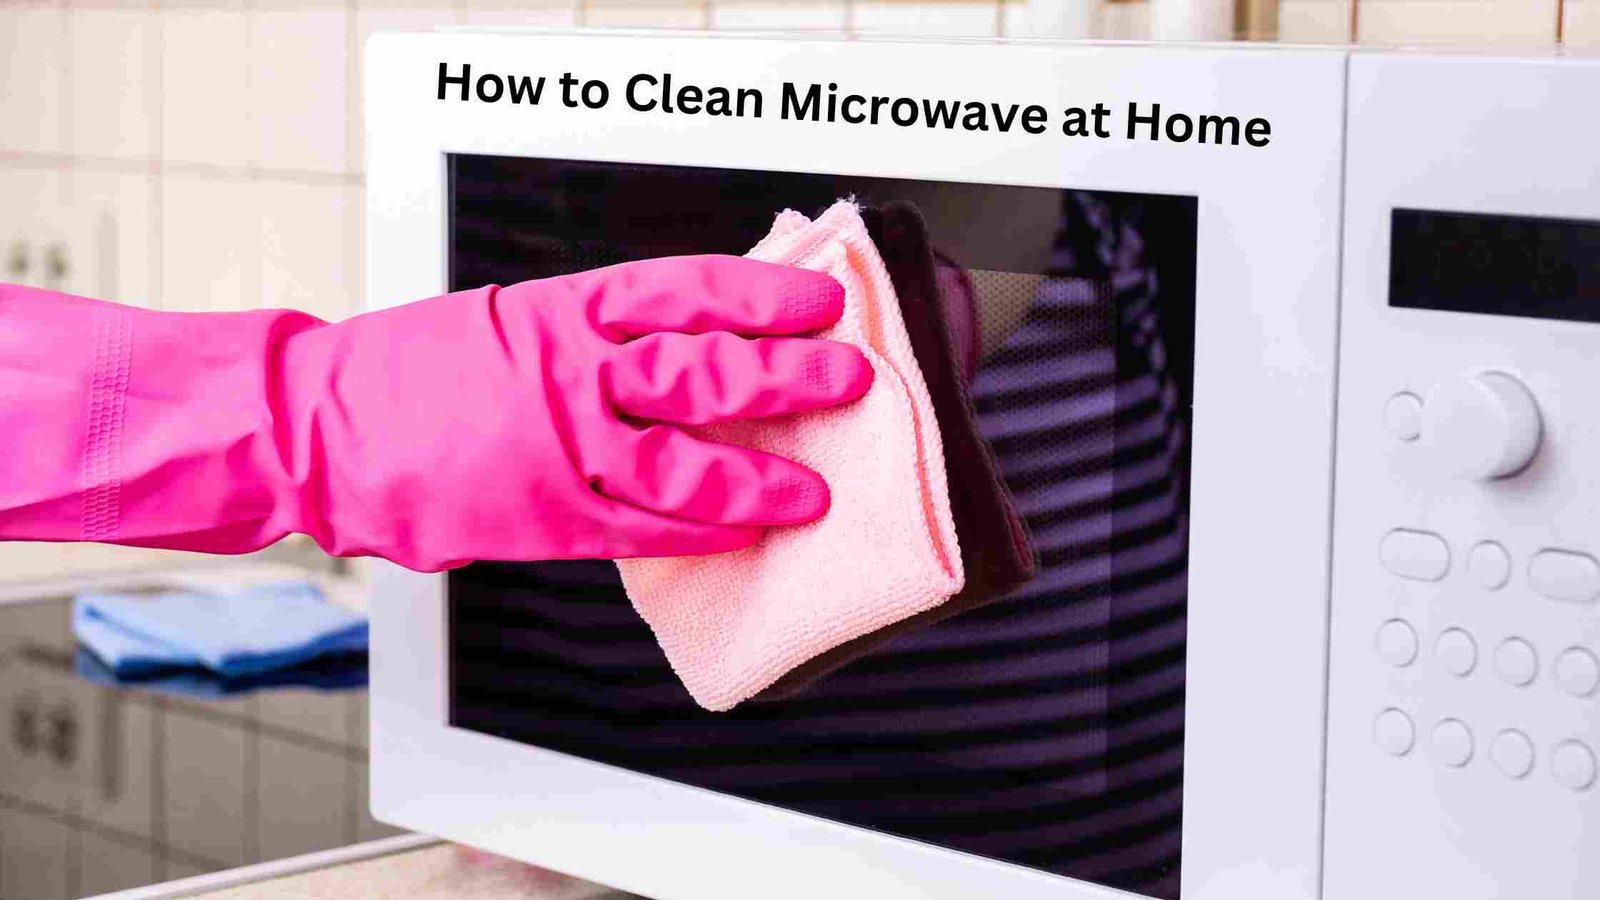 How to clean Microwave at Home